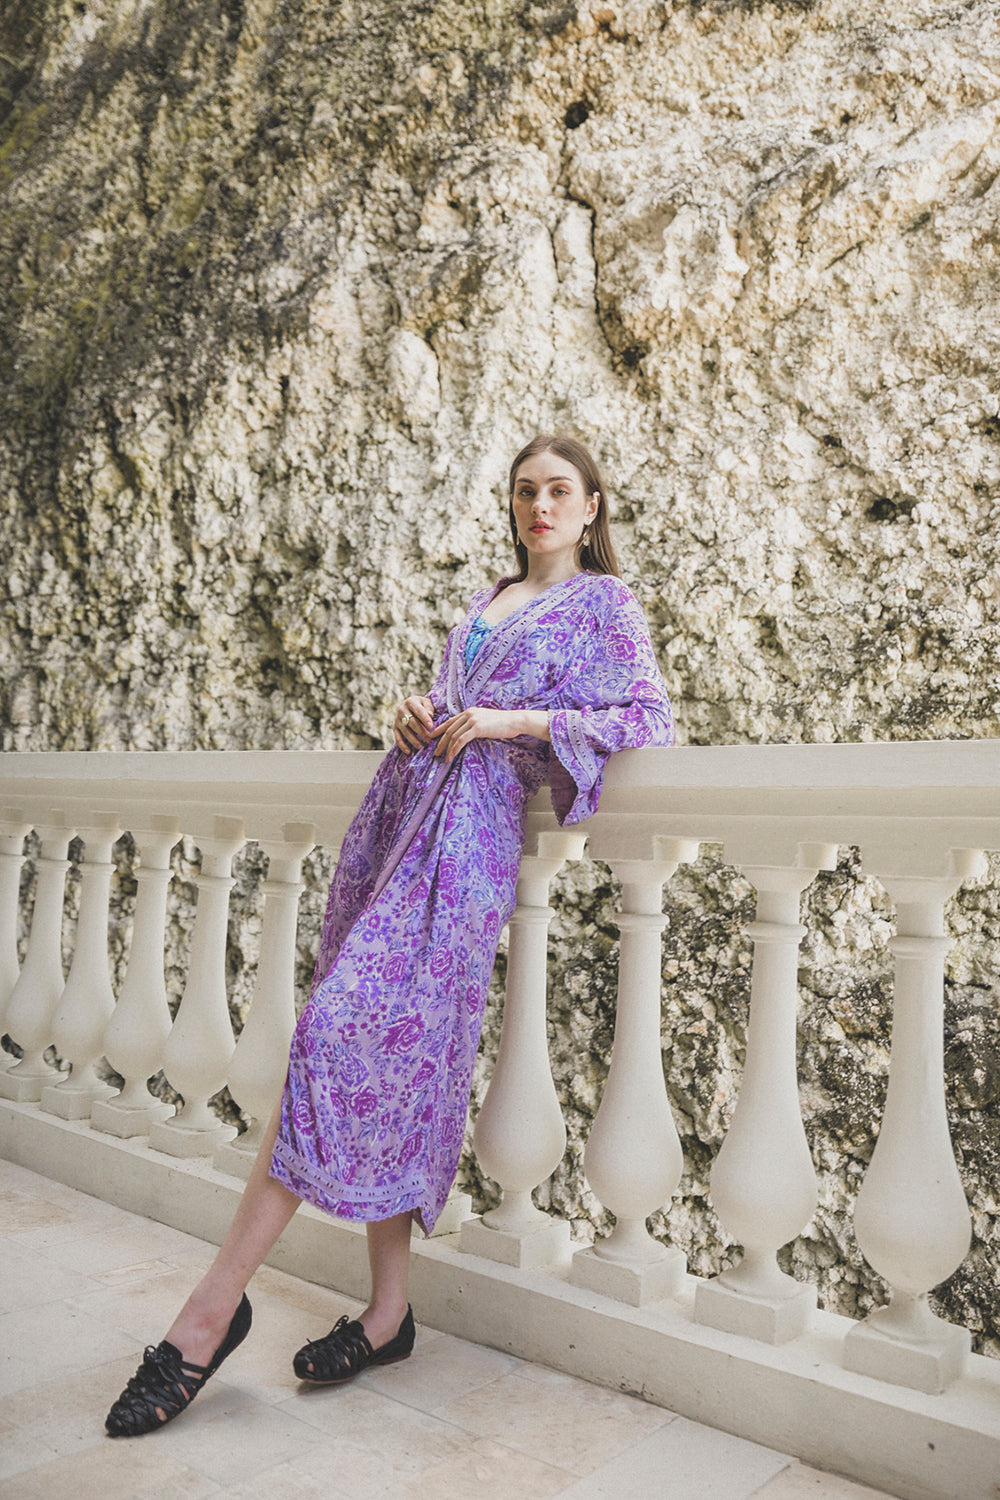 Unwind in luxury with the Peony Long Robe, a modern boho kimono from Tulle and Batiste's Peony collection, lovingly handmade by Balinese artisans with ethical integrity